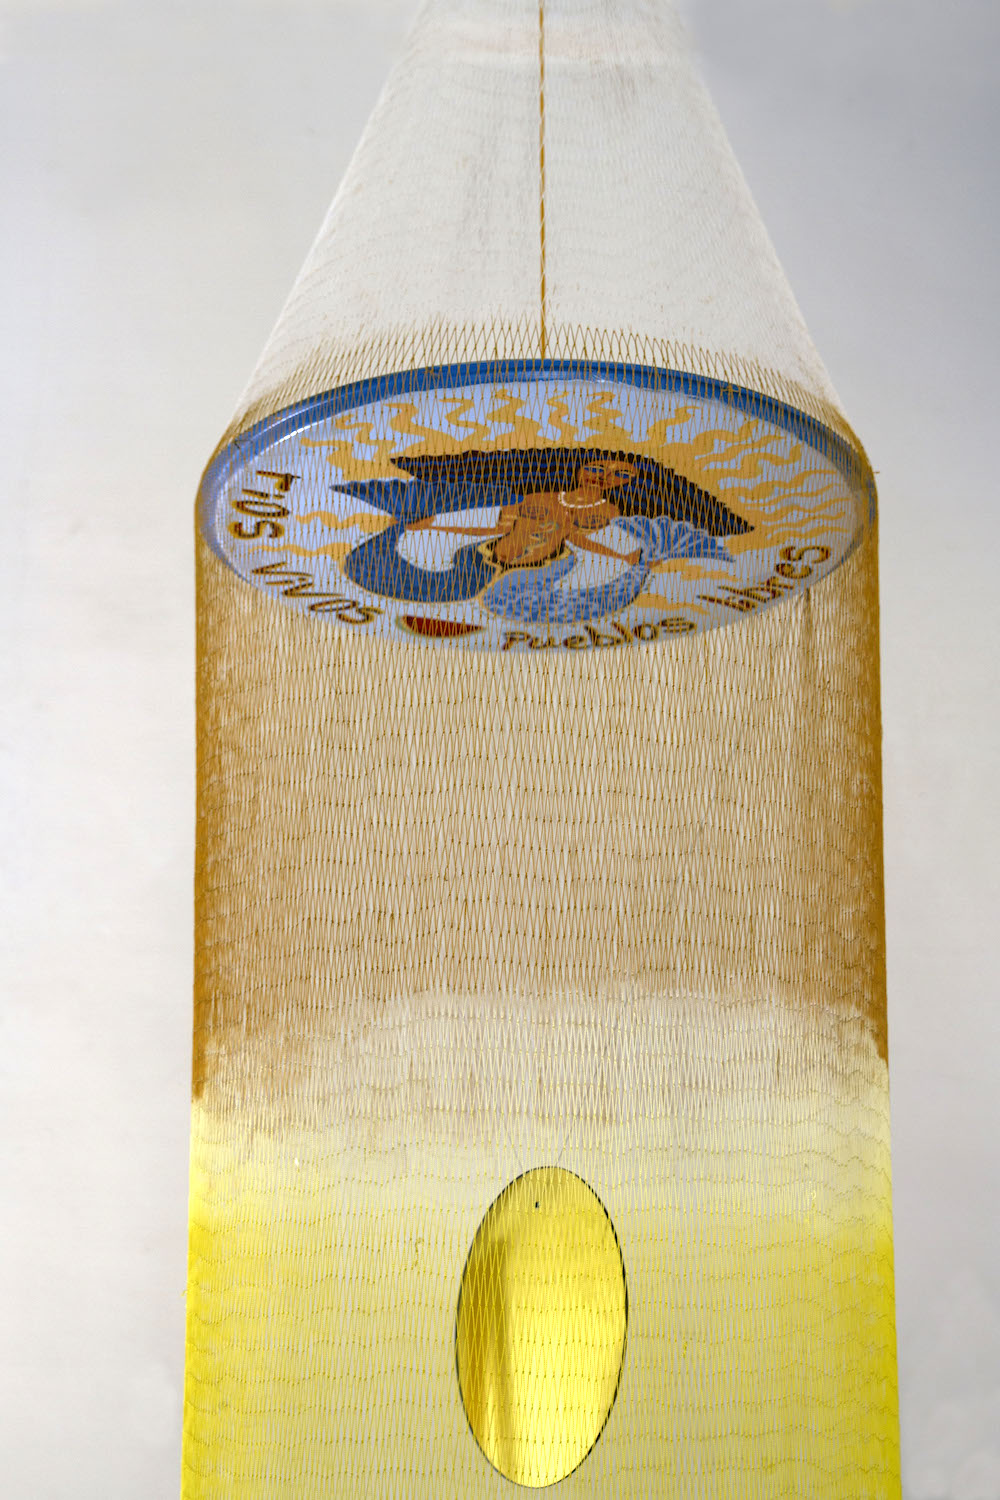 A form that looks like a mobile or a fishing net with orange and yellow fibers hangs suspended. At the bottom, small objects hang from strings in a corkscrew shape.